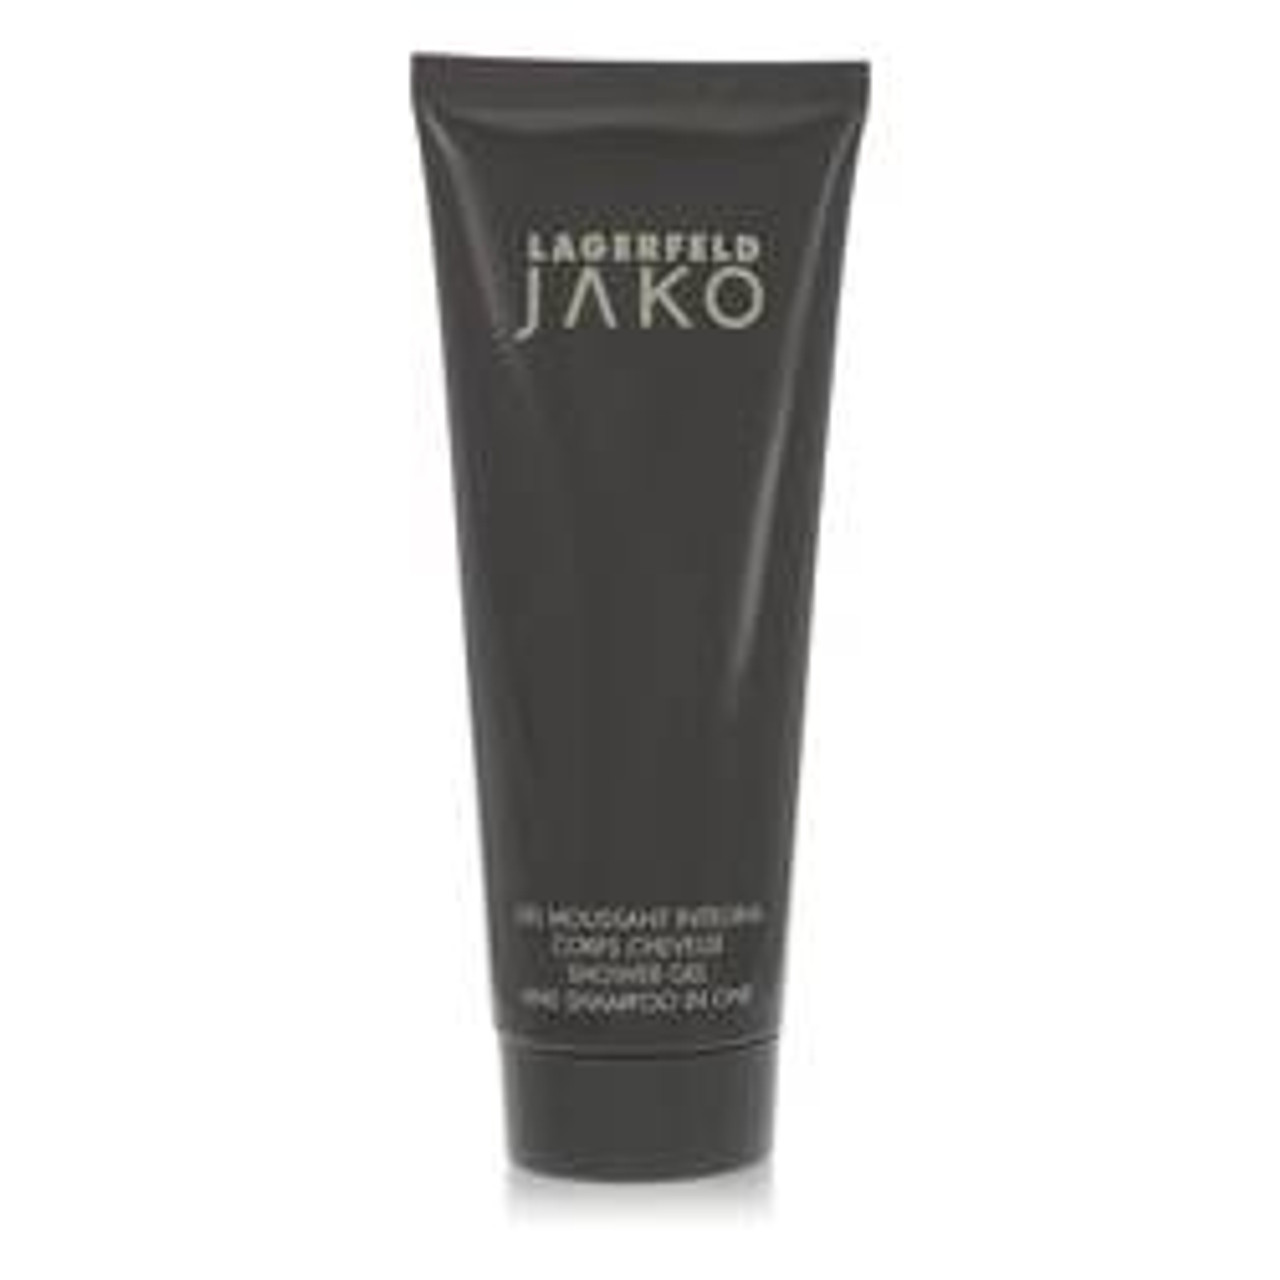 Jako Cologne By Karl Lagerfeld Shower Gel 3.4 oz for Men - [From 15.00 - Choose pk Qty ] - *Ships from Miami